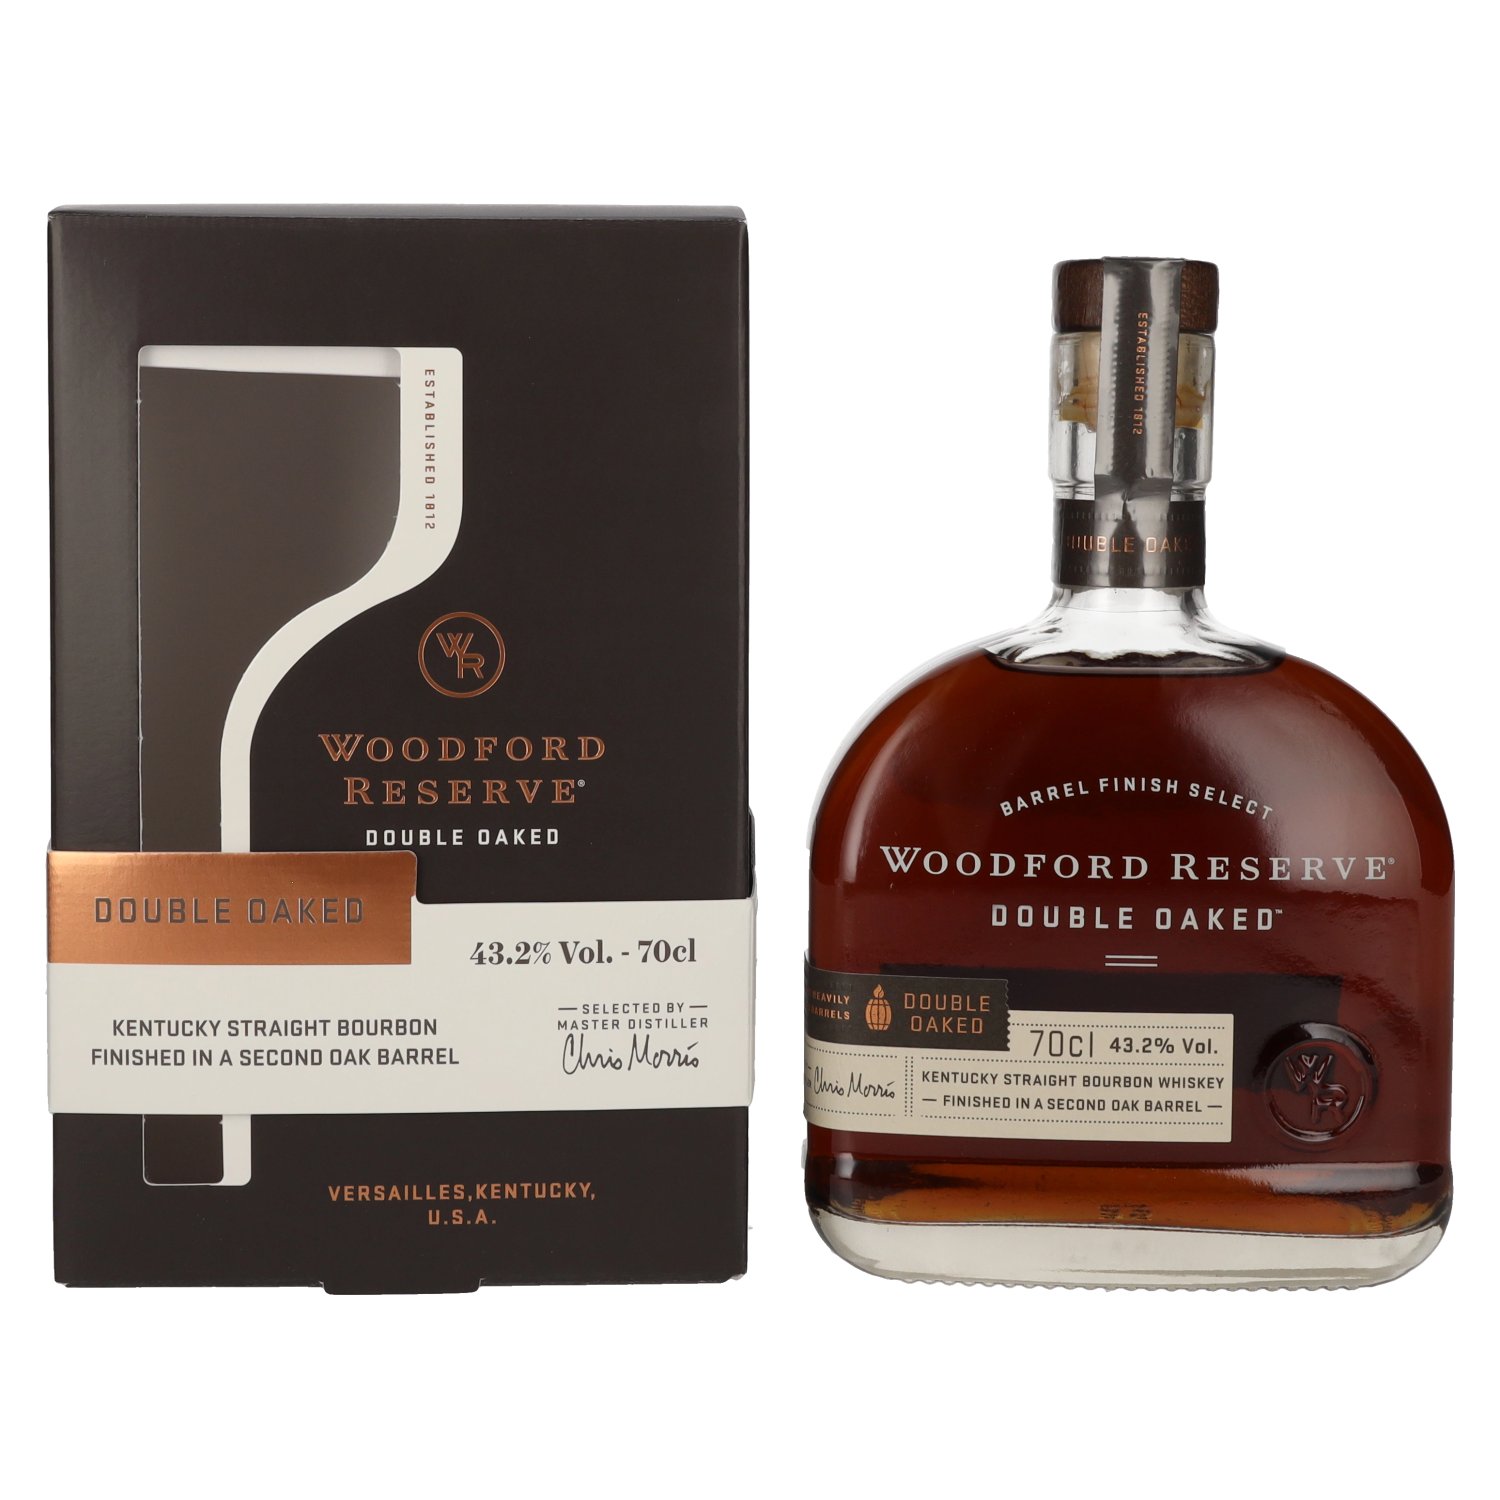 Whiskey 0,7l in Geschenkbox Reserve 43,2% Woodford Straight Bourbon Kentucky DOUBLE OAKED Vol.